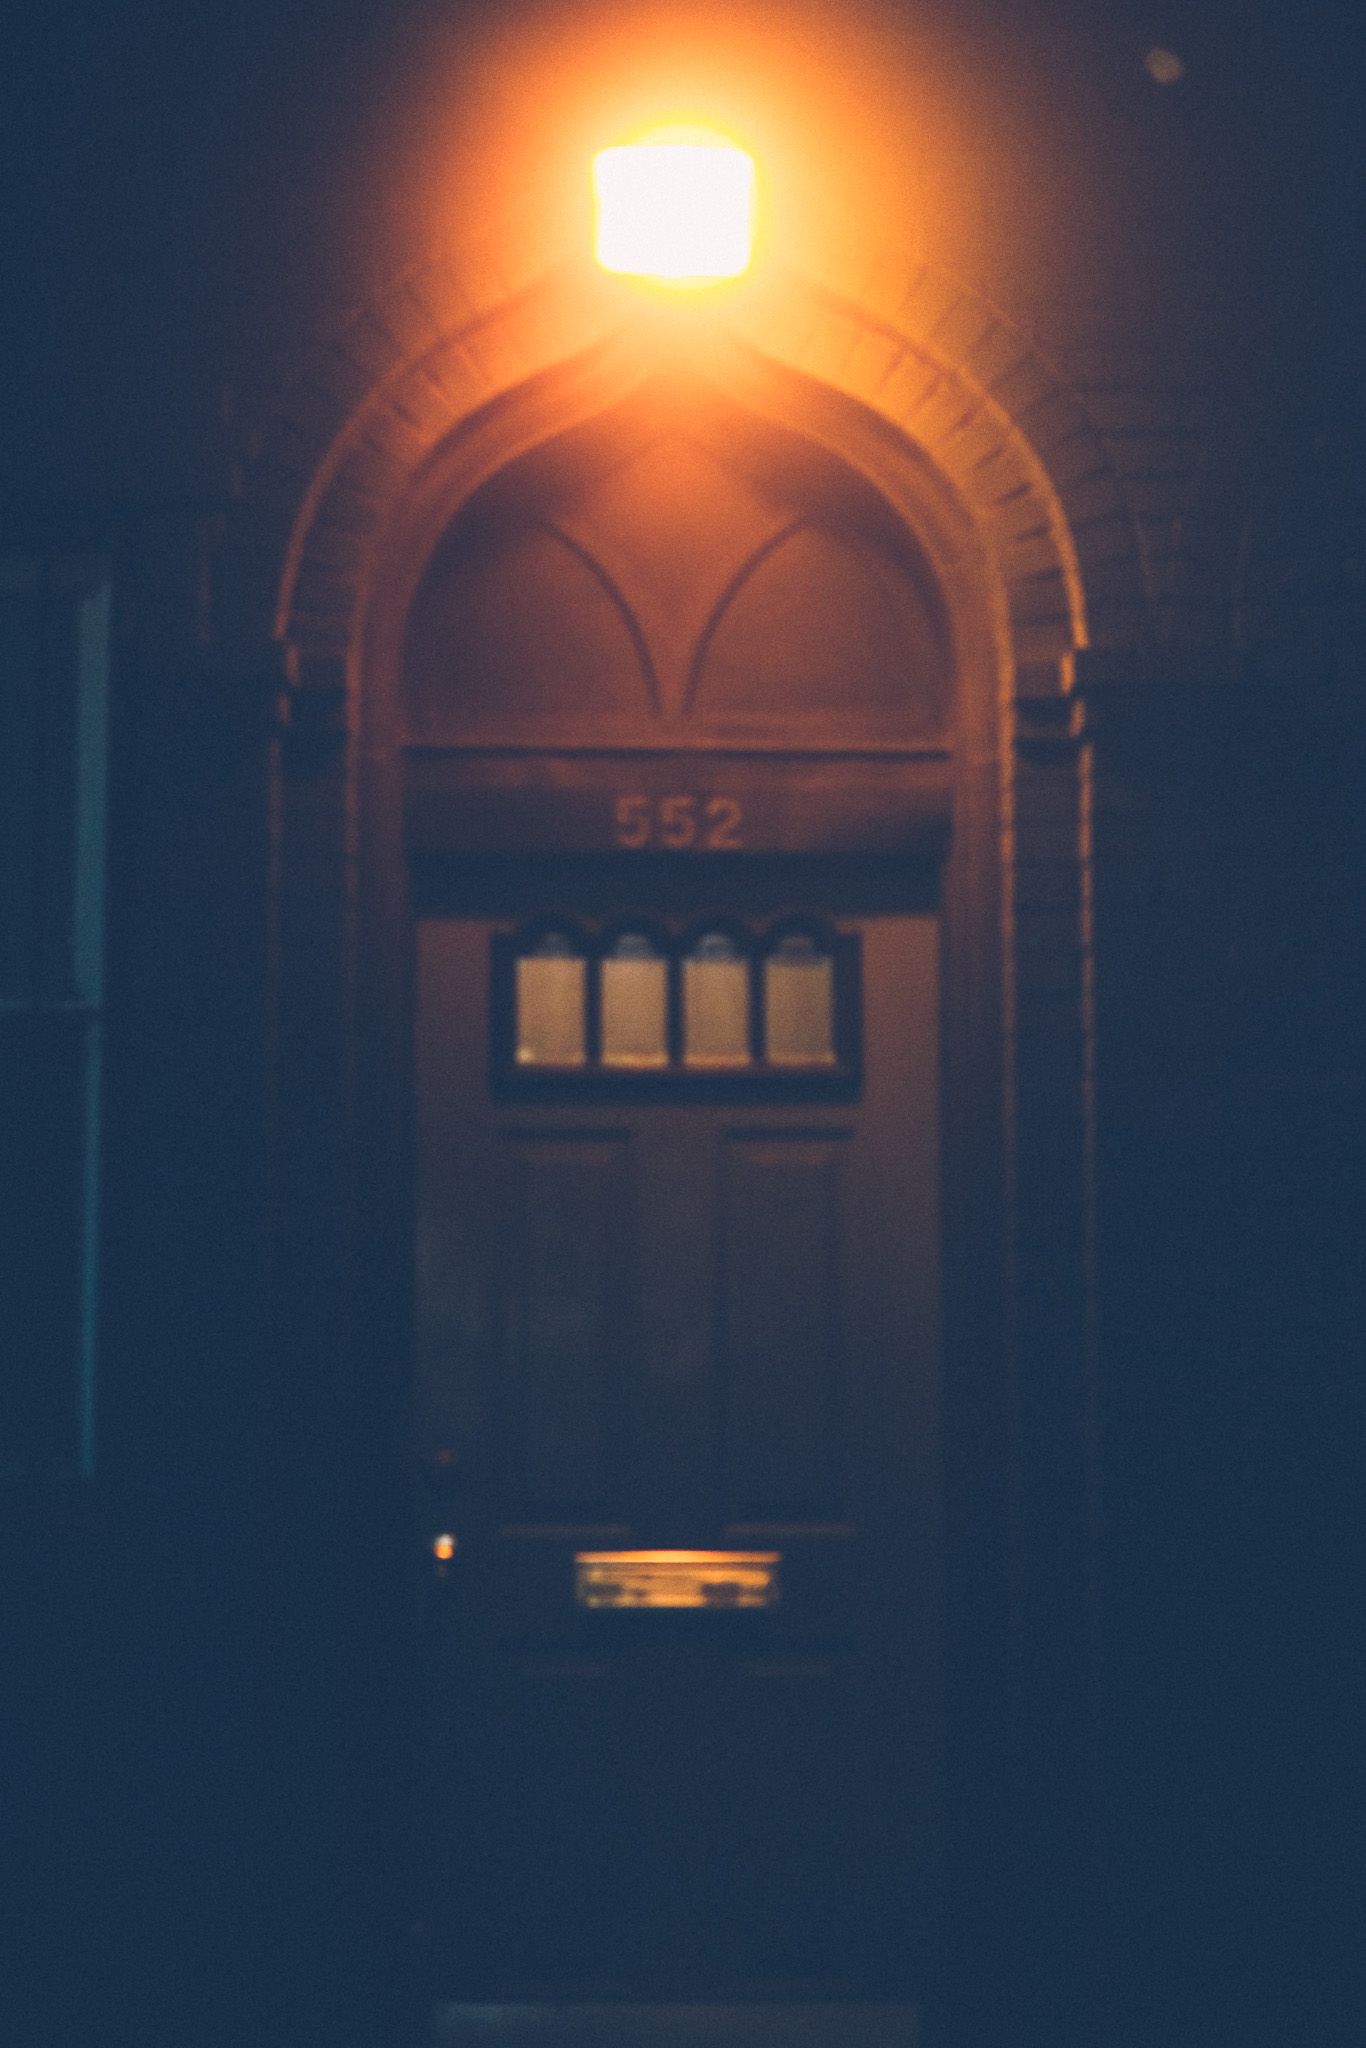 A front door at night is just slightly out of focus, bathed in an orange light right above the arched door frame with the number 552 underneath it.